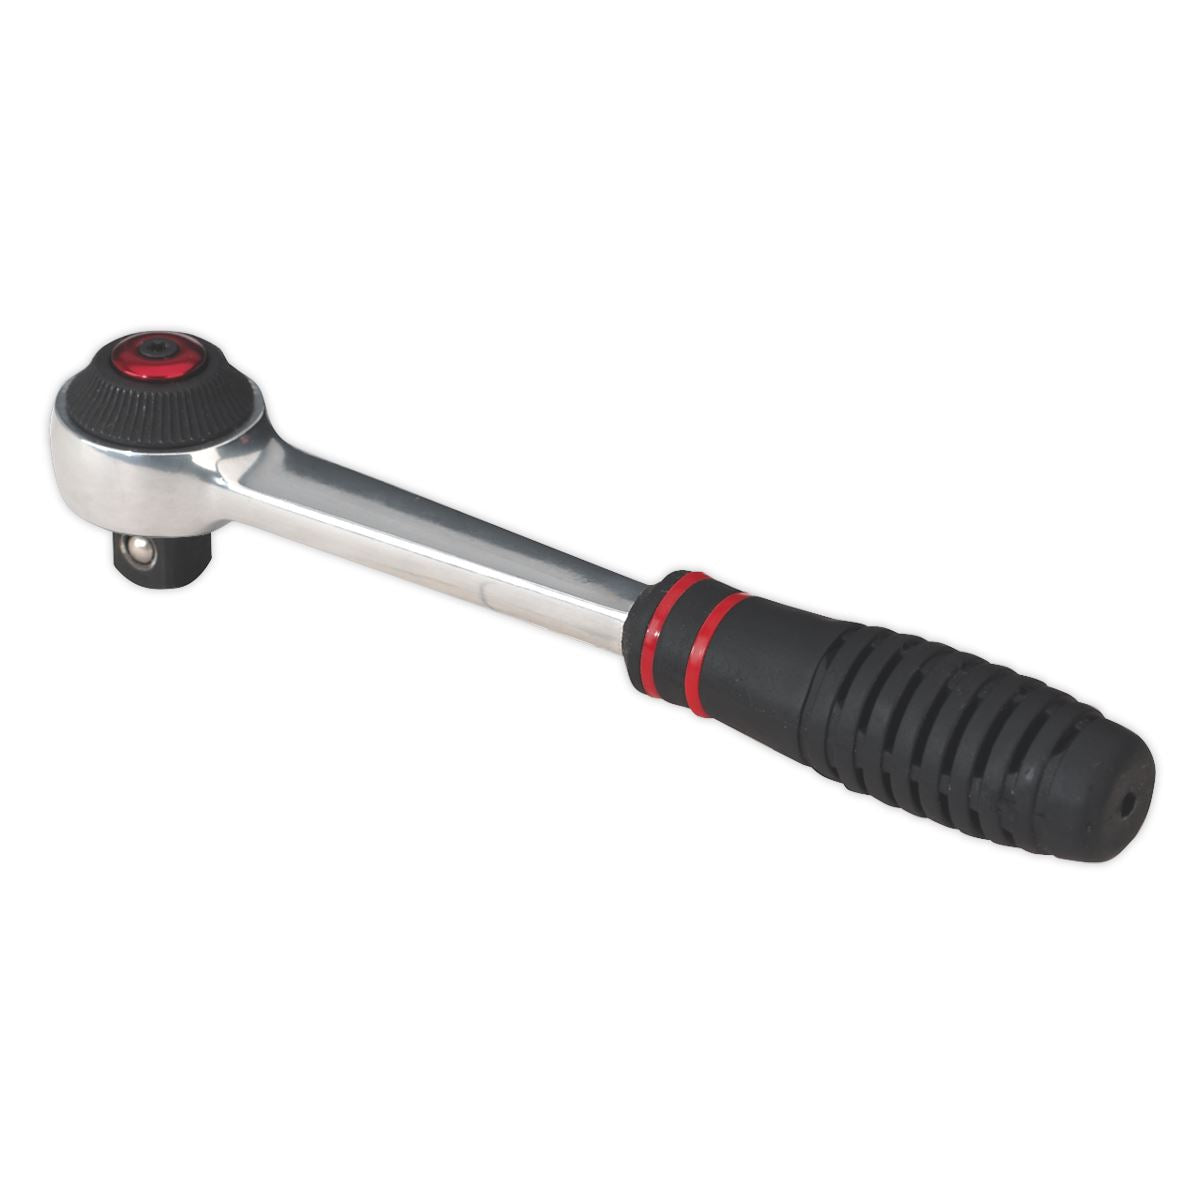 Sealey Premier Ratchet Wrench 1/4"Sq Drive 72-Tooth